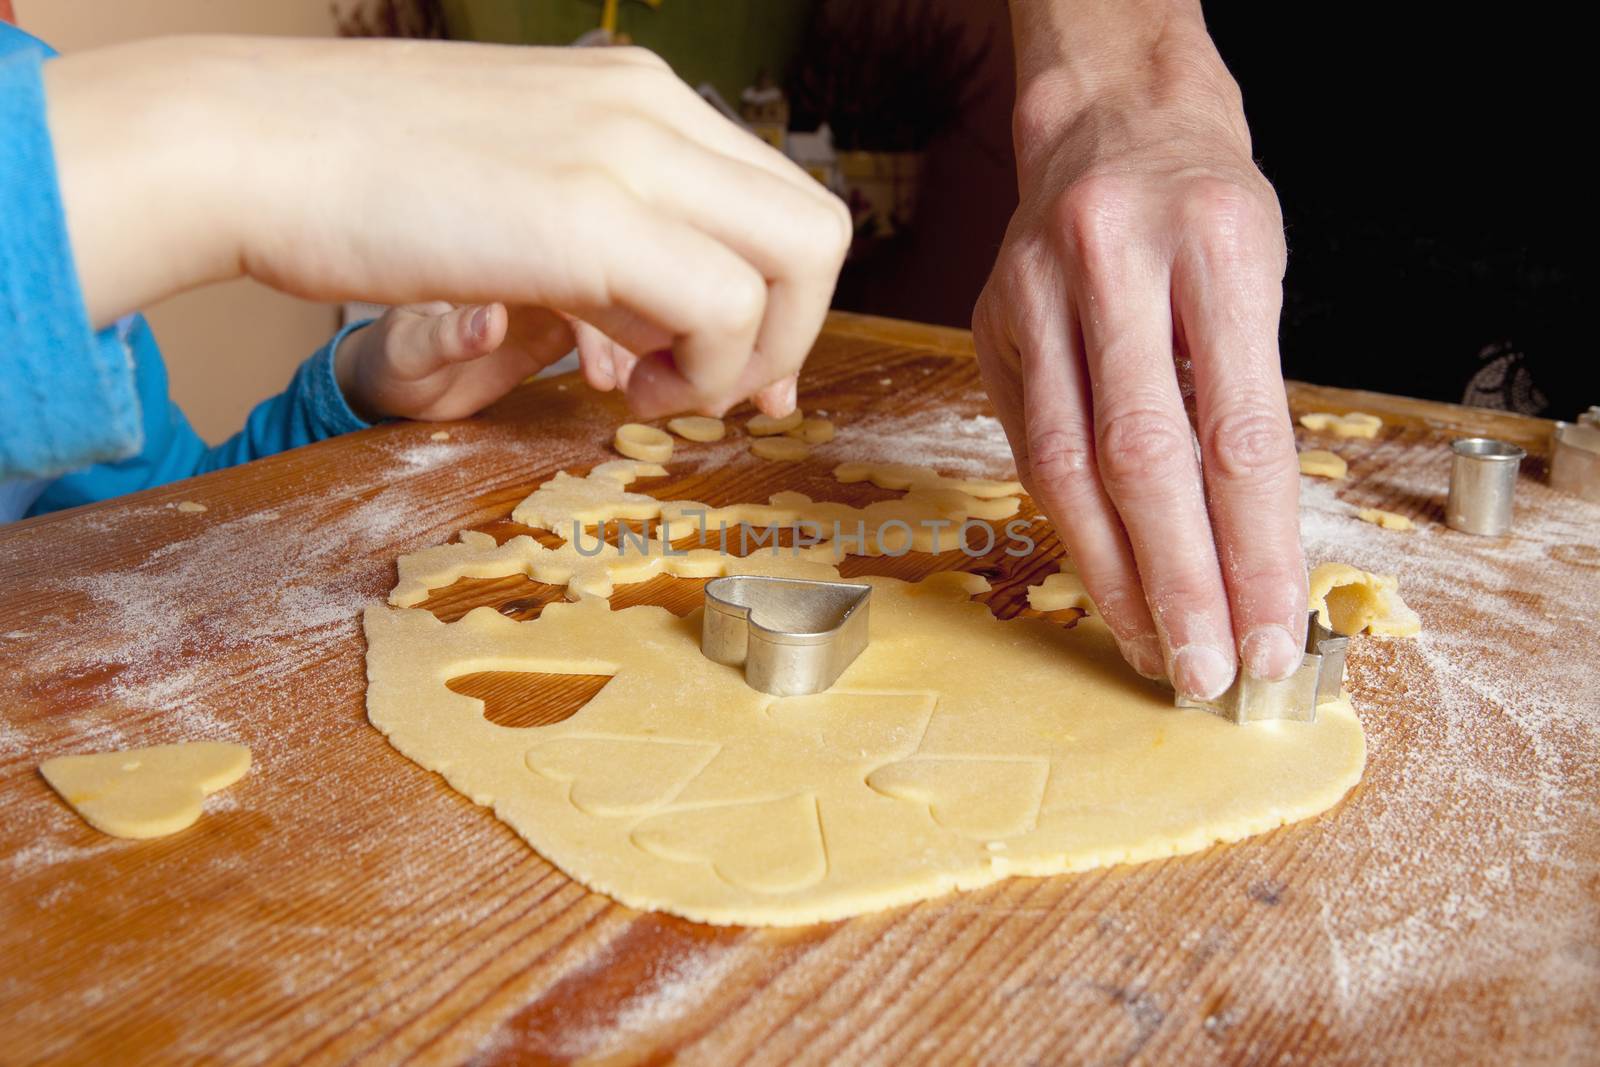 Christmas Baking - Shaping Dough with Forms by courtyardpix